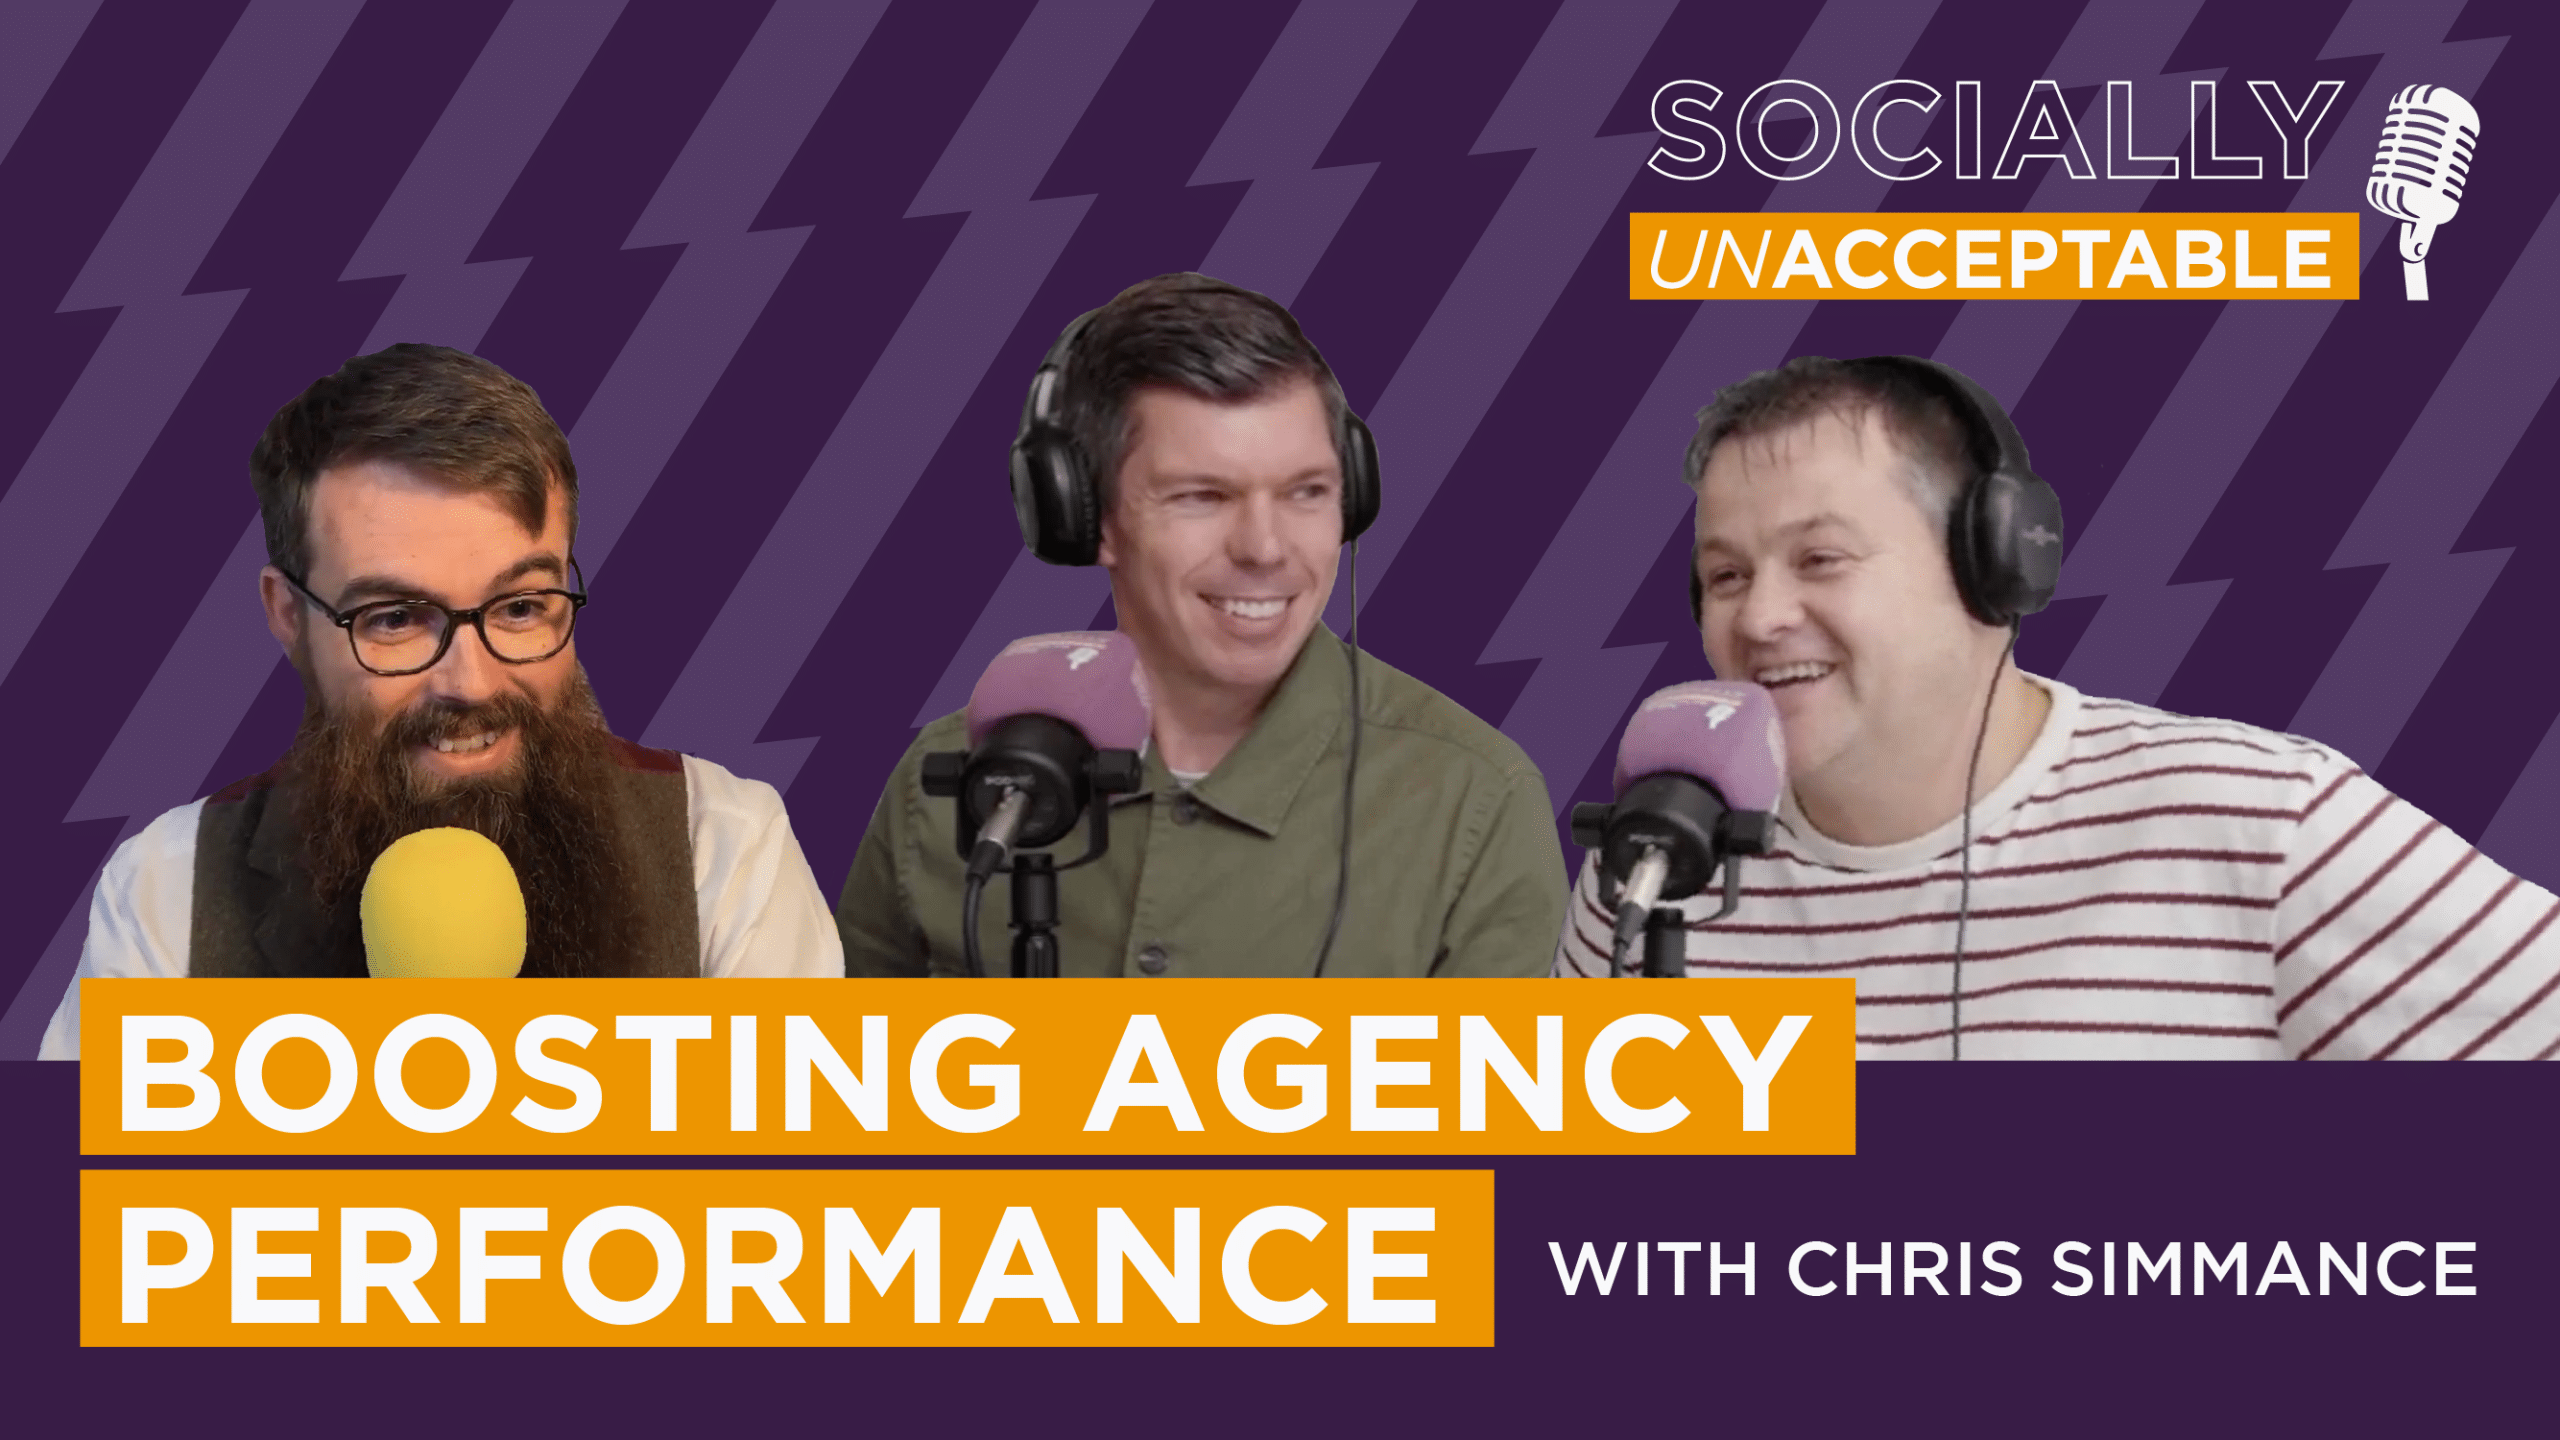 Socially Unacceptable – Boosting Agency Performance With Founder of OMG Center, Chris Simmance